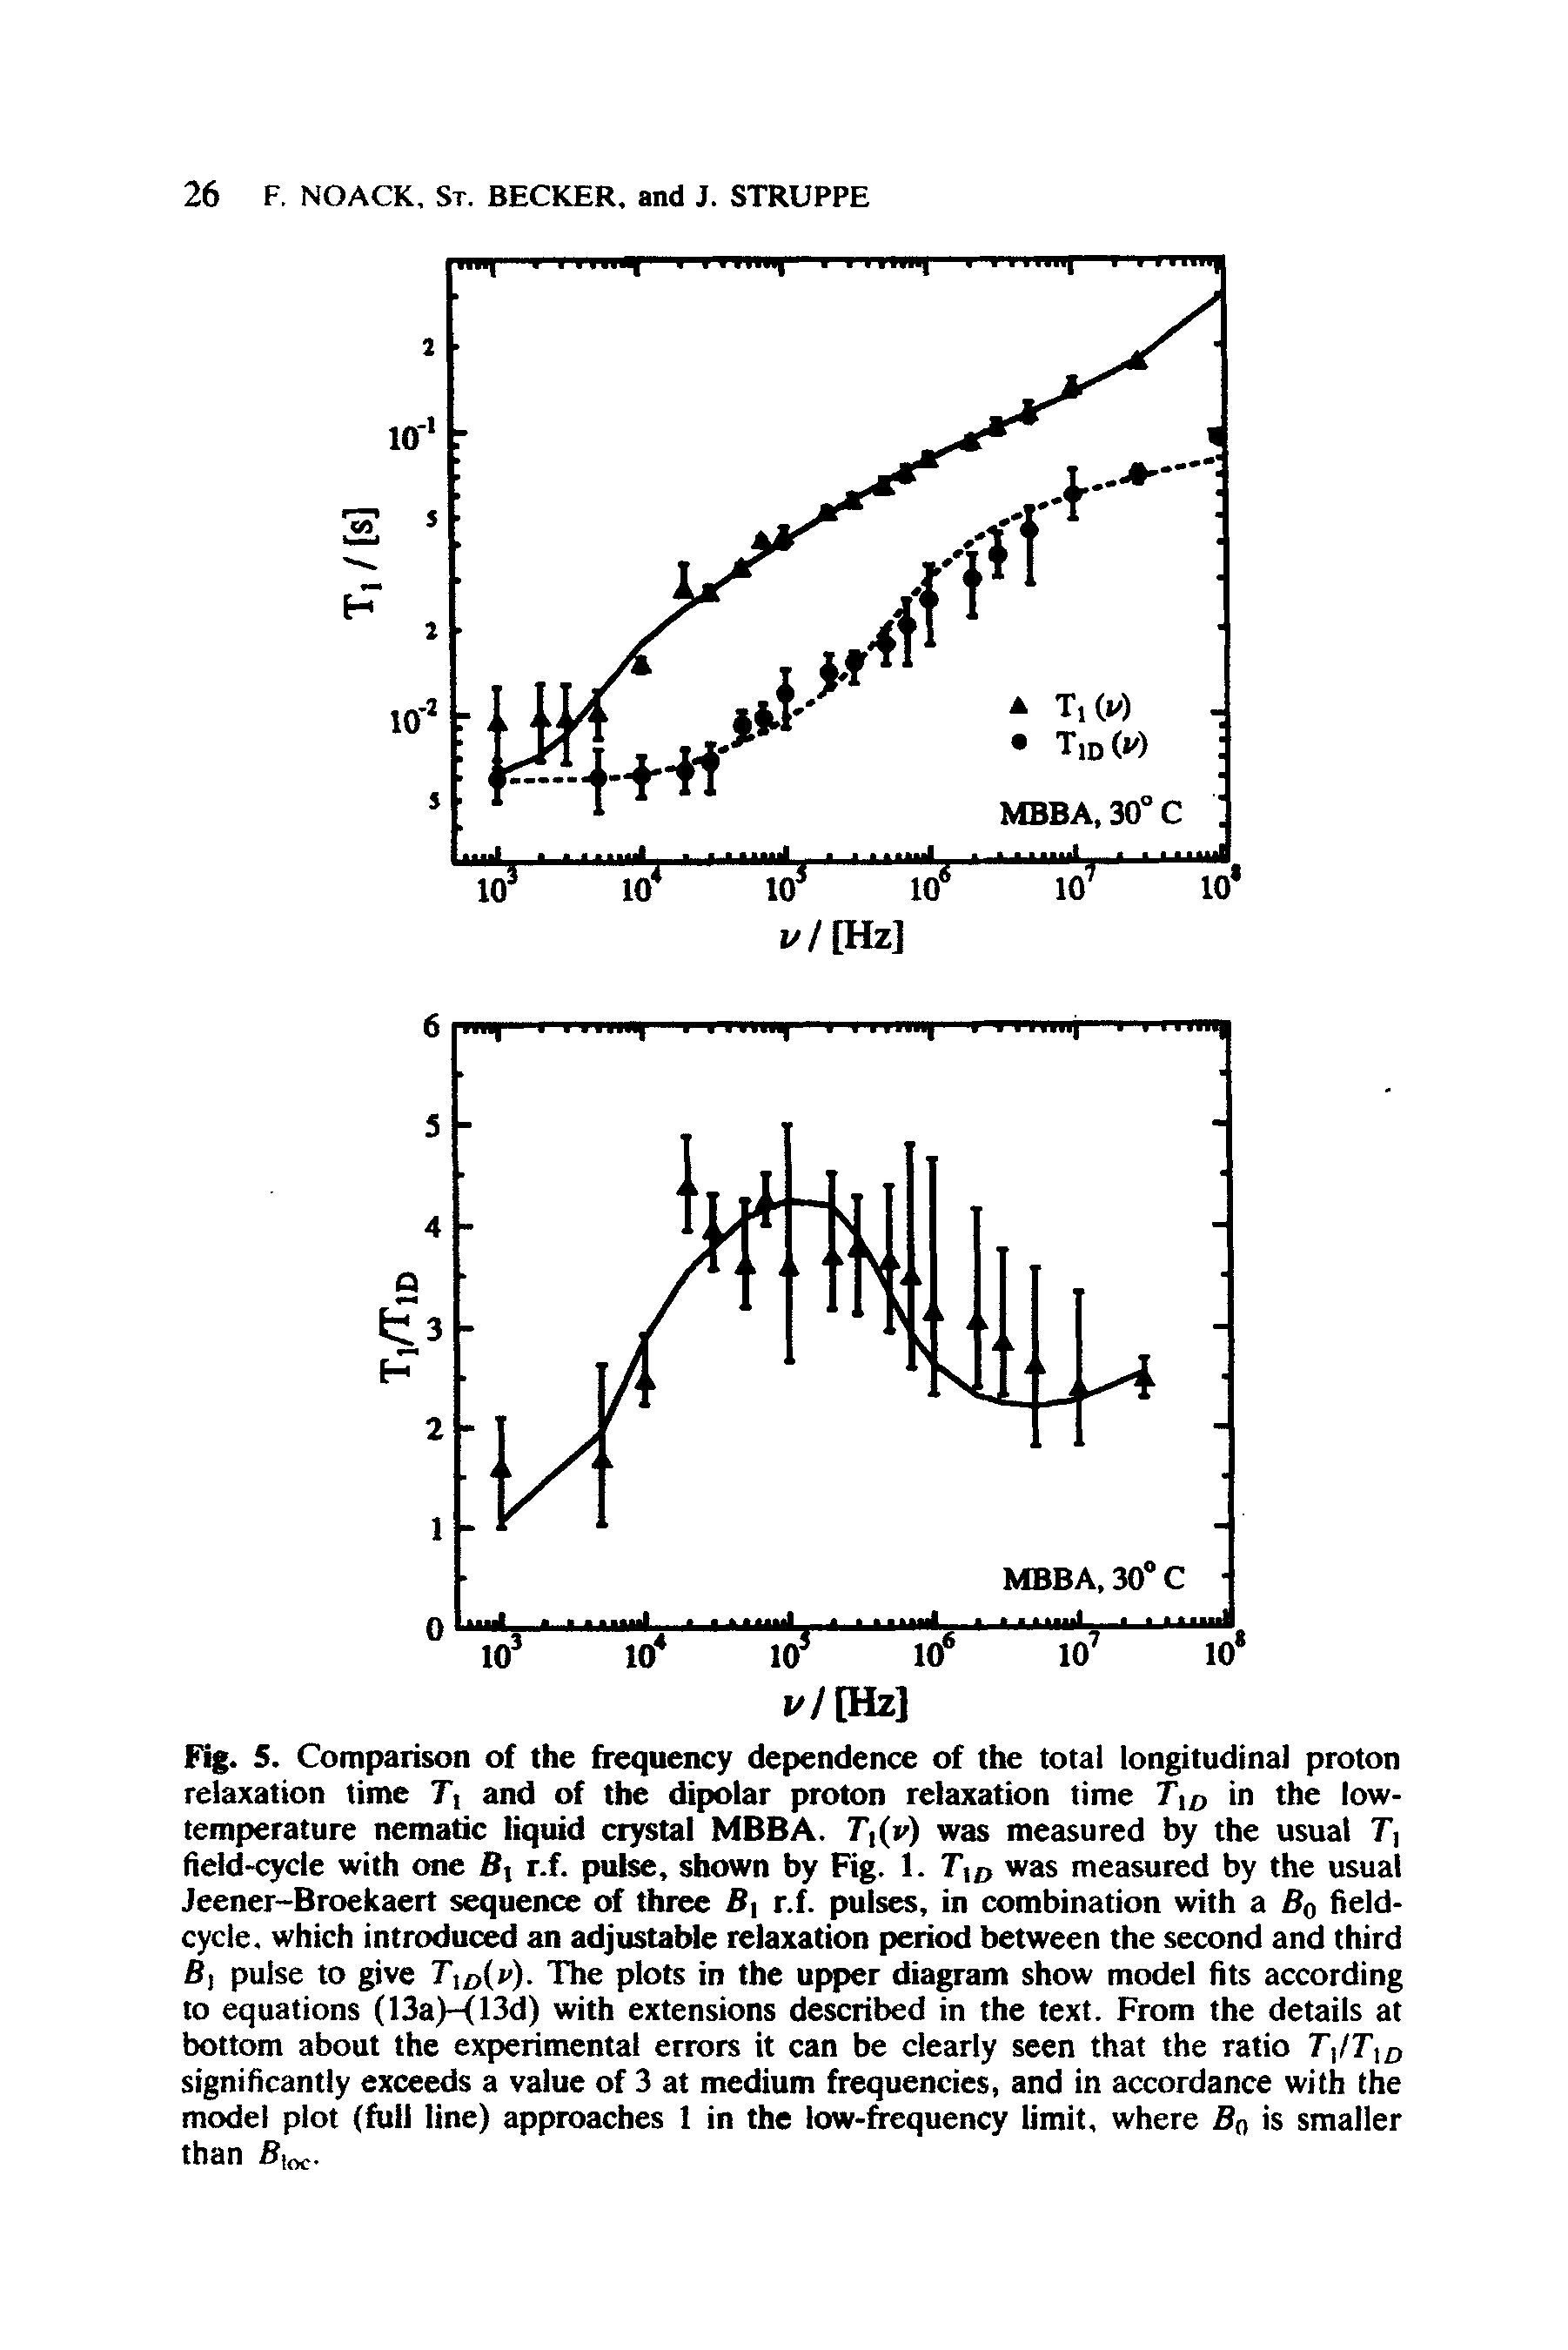 Fig. 5. Comparison of the frequency dependence of the total longitudinal proton relaxation time Ti and of the dipolar proton relaxation time Tto in the low-temperature nematic liquid crystal MBBA. r (v) was measured by the usual T] field-cycle with one B, r.f. pul%, shown by Rg. 1. Tto was measured by the usual Jeener-Broekaert sequence of three B r.f. pulses, in combination with a Bq field-cycle. which introduce an adjustable relaxation period between the second and third Bj pulse to give Tto(i )- The plots in the upper diagram show model fits according to equations (13a) 13d) with extensions described in the text. From the details at bottom about the experimental errors it can be clearly seen that the ratio T Tto significantly exceeds a value of 3 at medium frequencies, and in accordance with the model plot (frill line) approaches 1 in the low-frequency limit, where Bo is smaller than Bloc.